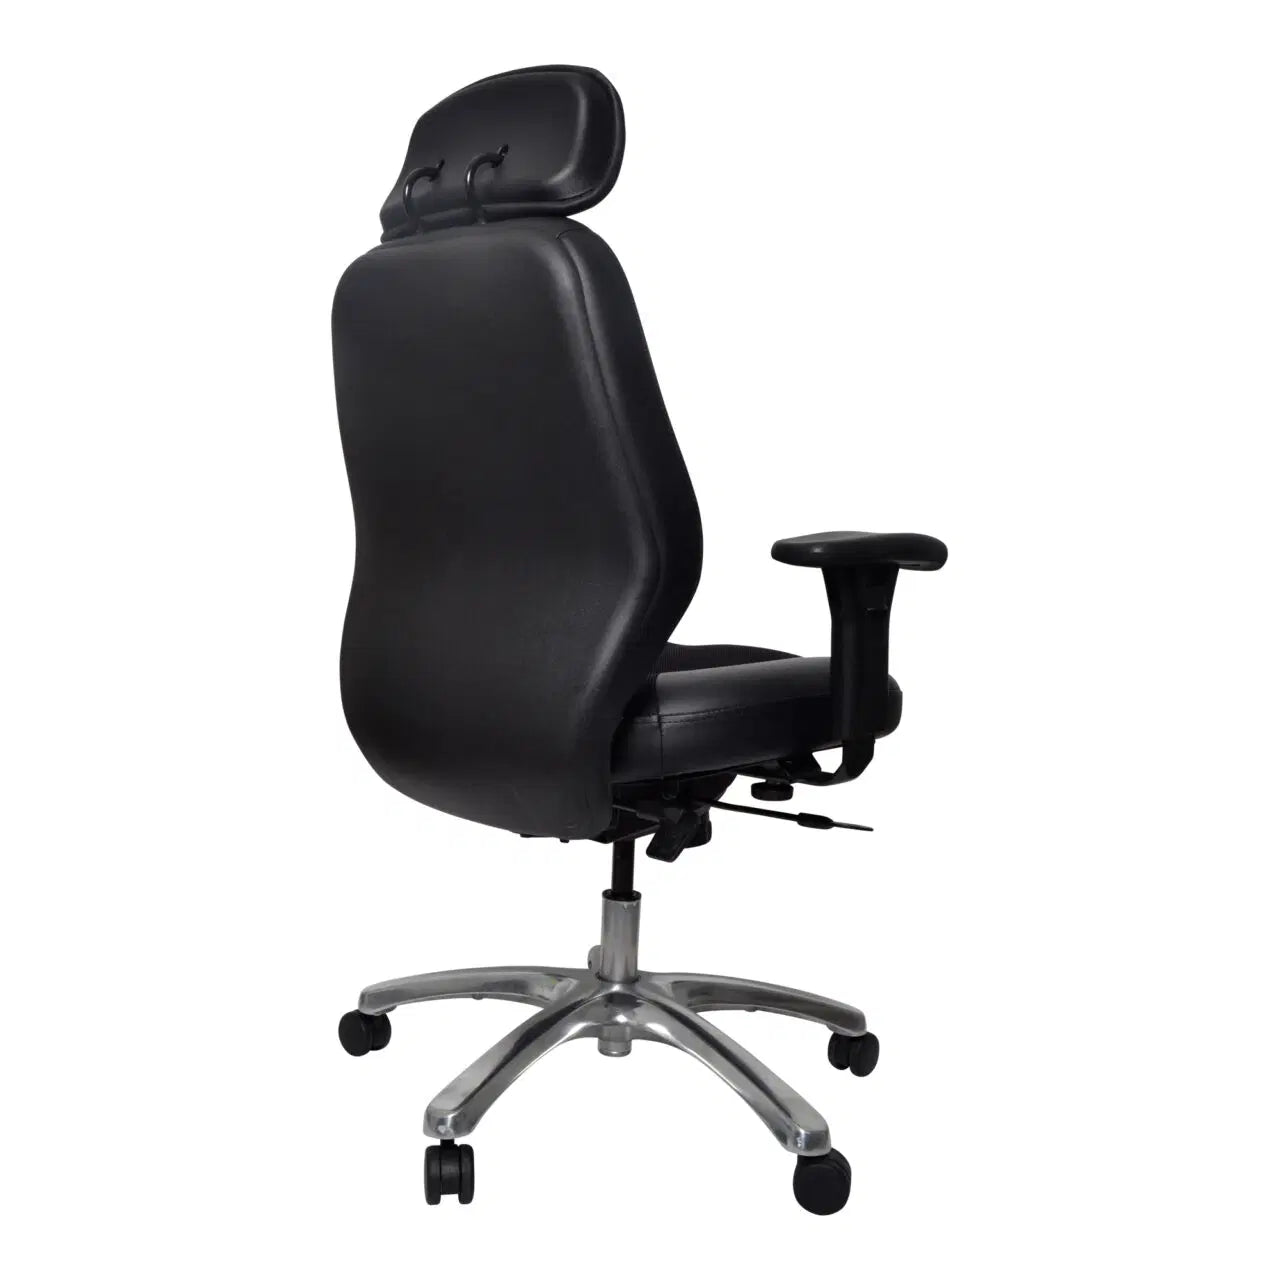 Everest - Executive Leather Chair